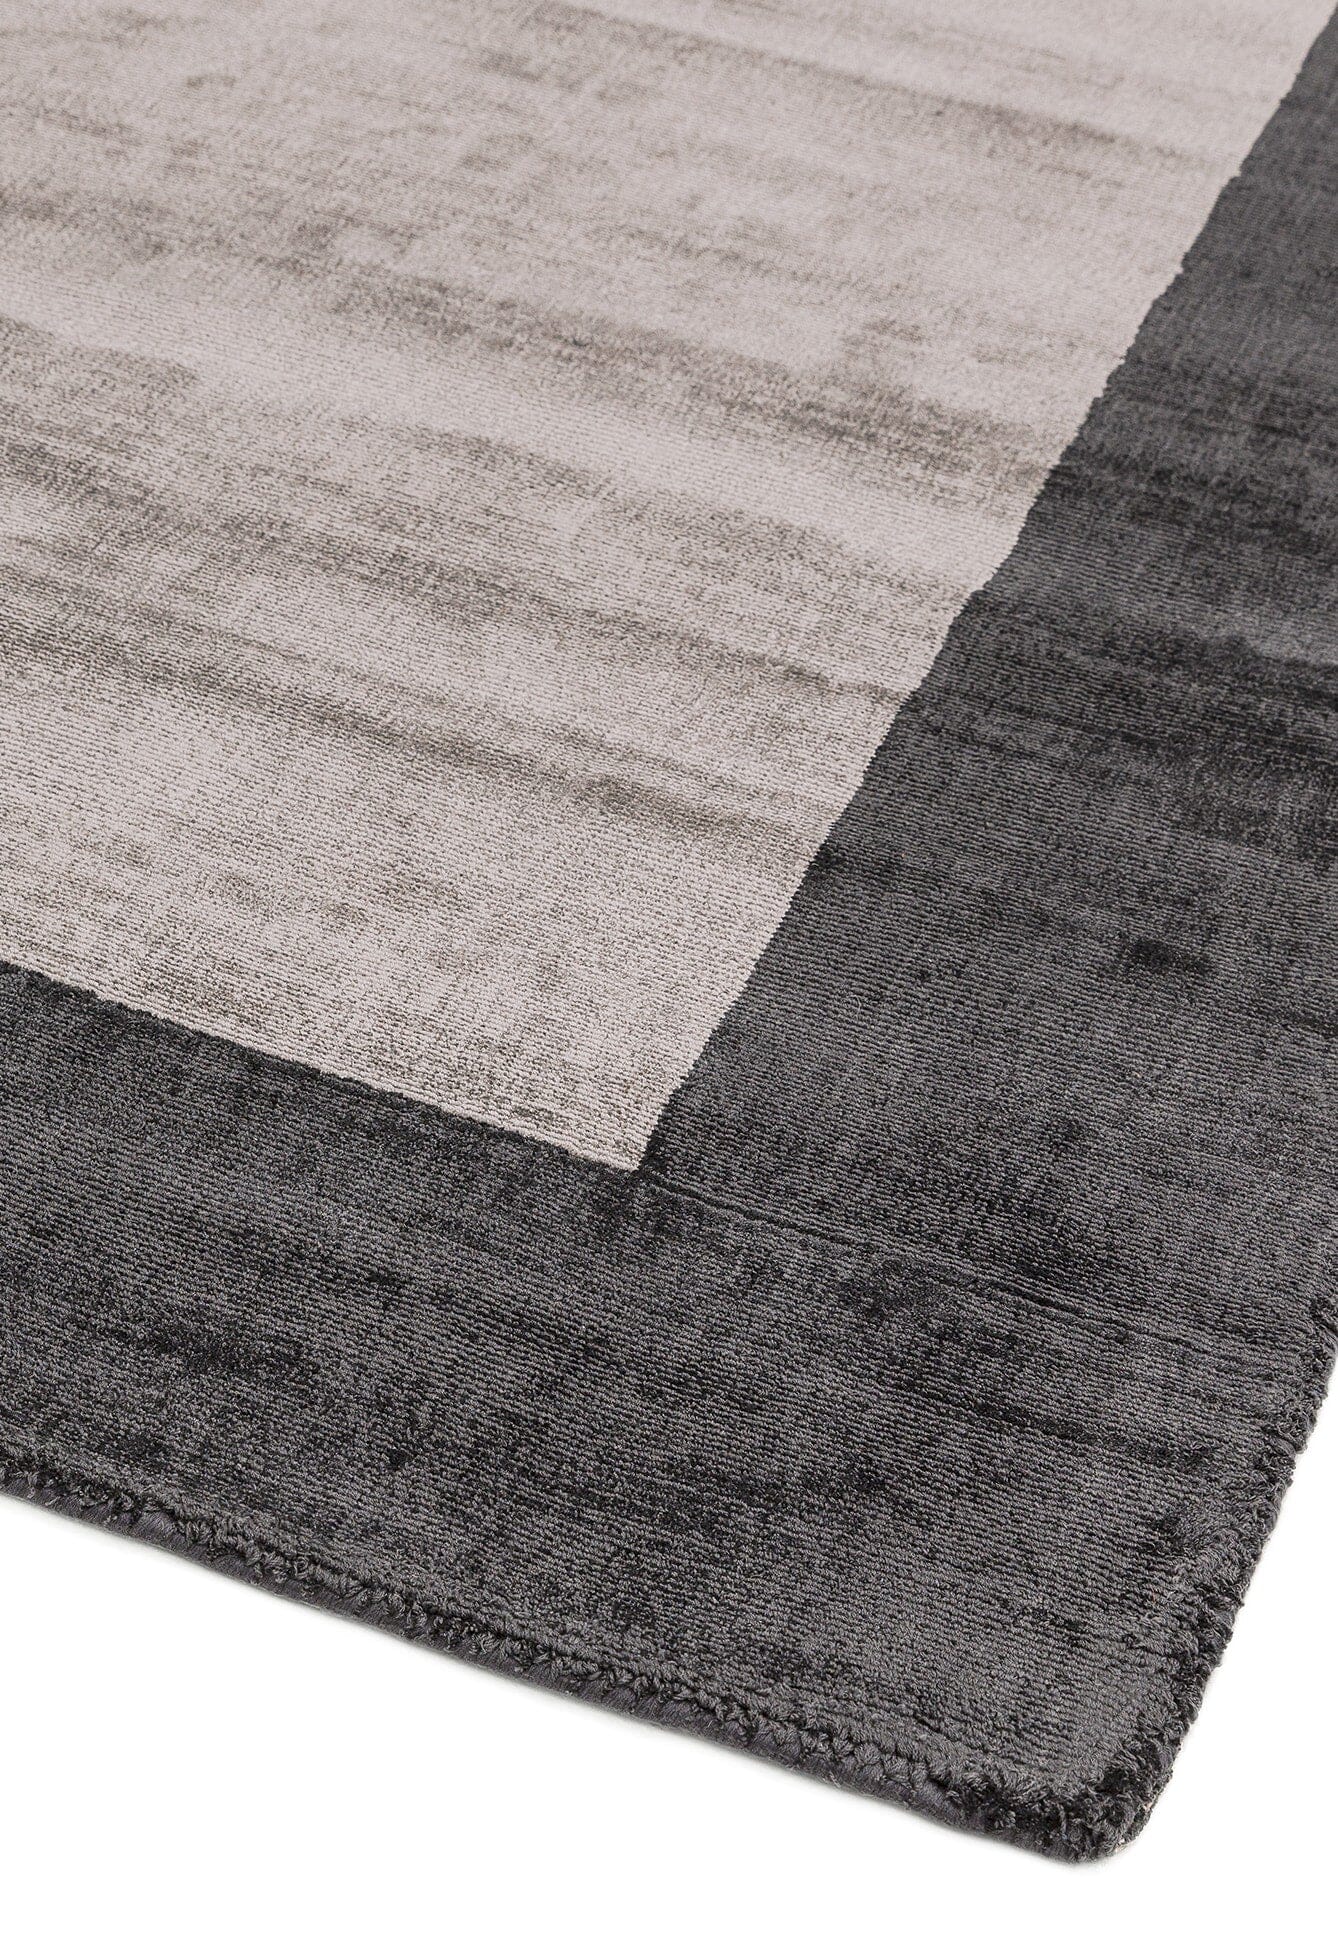  Asiatic Carpets-Asiatic Carpets Blade Hand Woven Rug Charcoal Silver - 160 x 160cm-Grey, Silver 373 